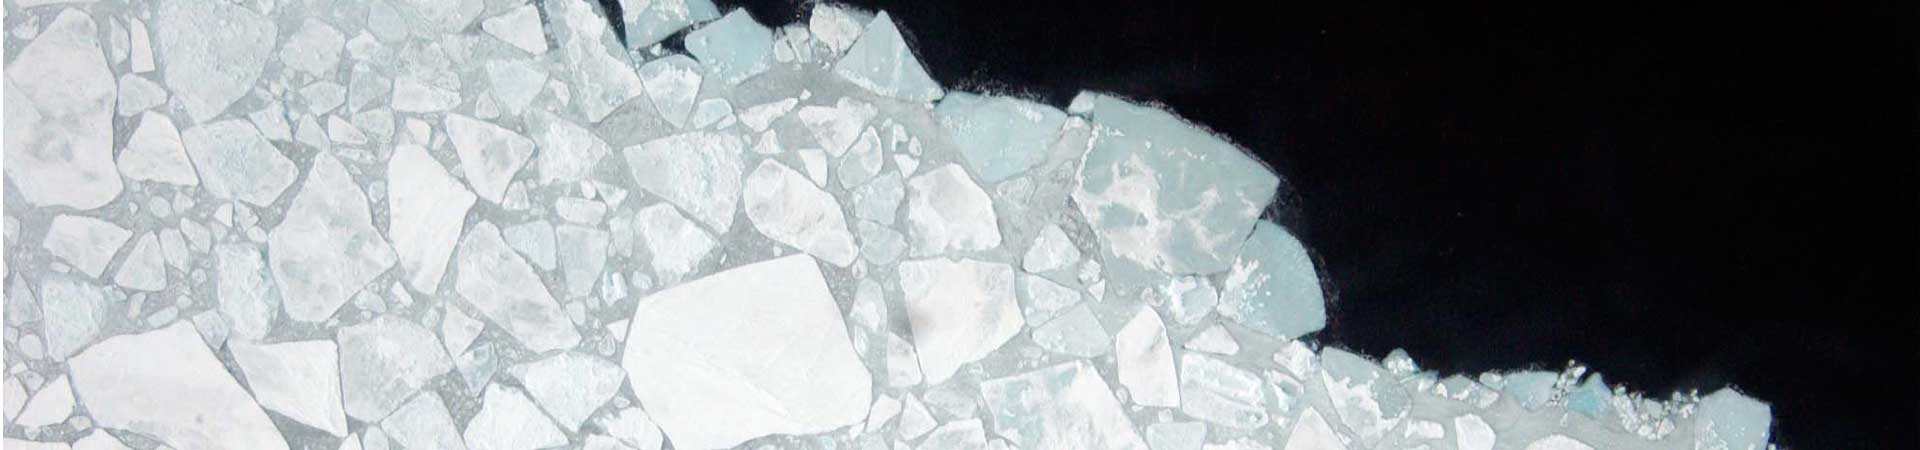 Drone footage of the margins of Arctic sea ice with water appearing black